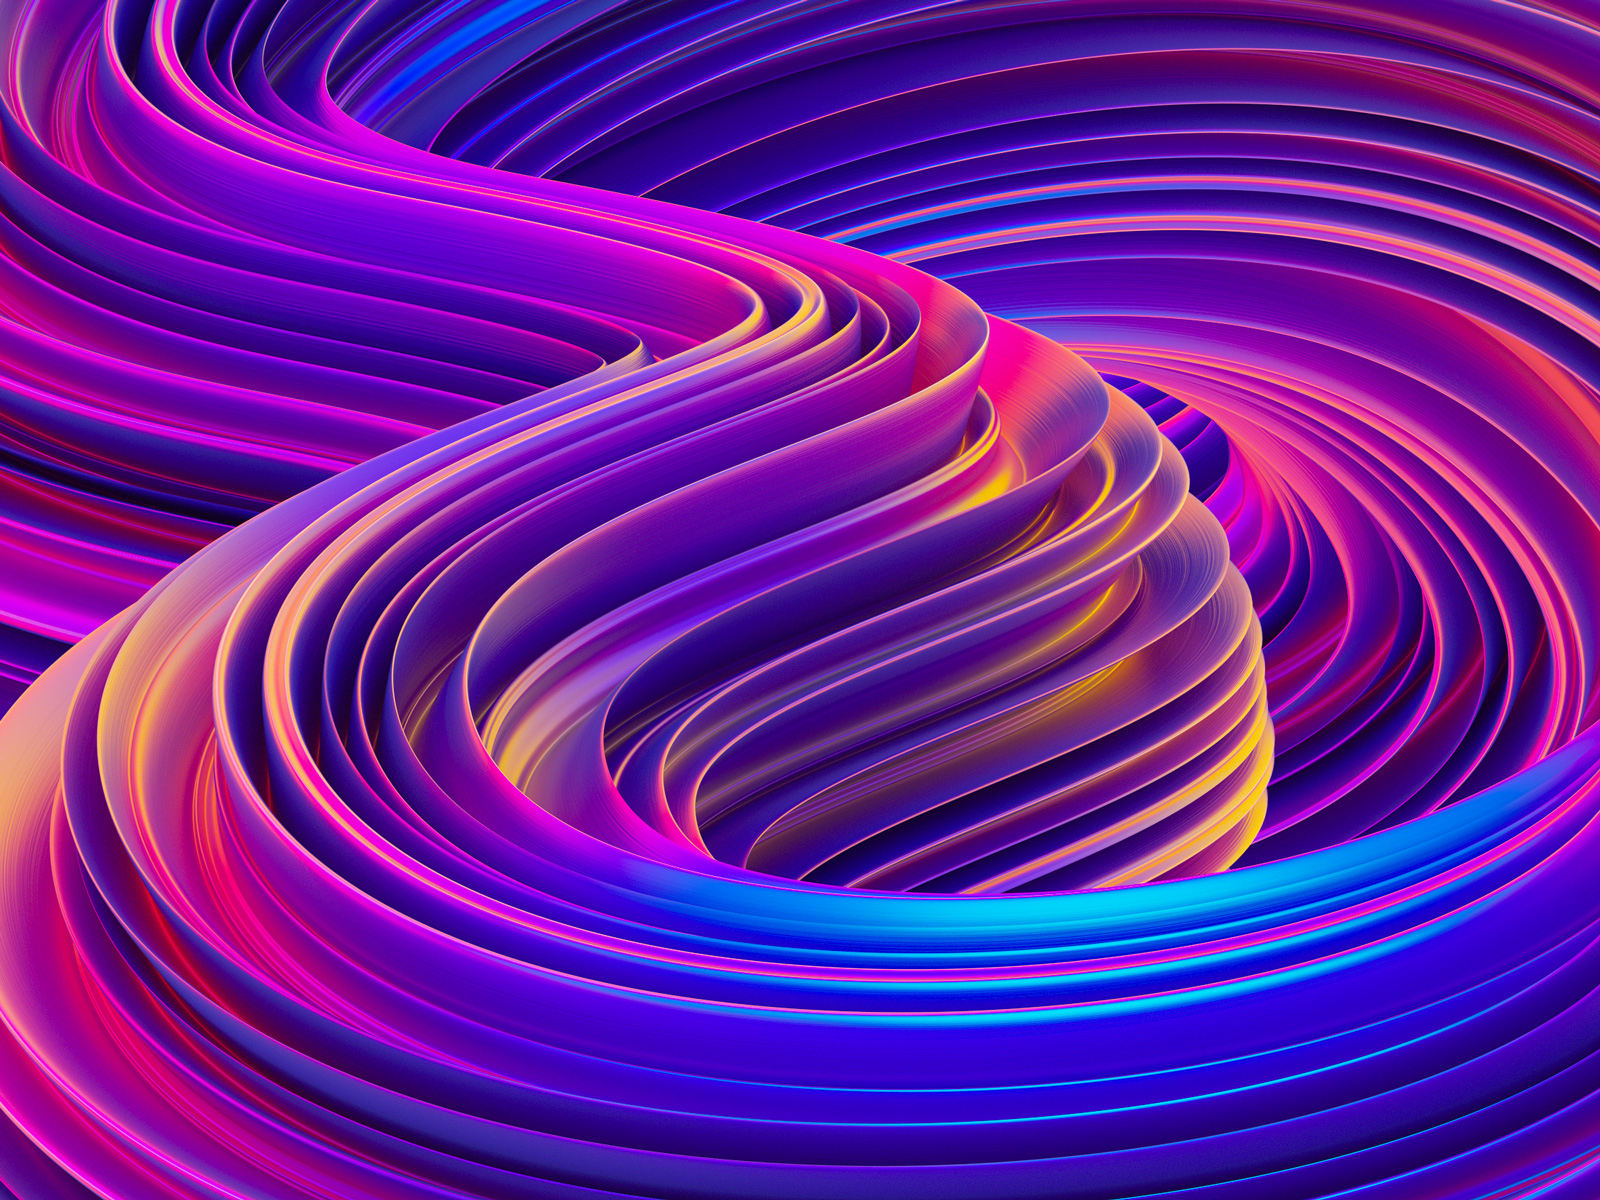 Abstract Liquid 3D Backgrounds 2 by Alexey Boldin on Dribbble